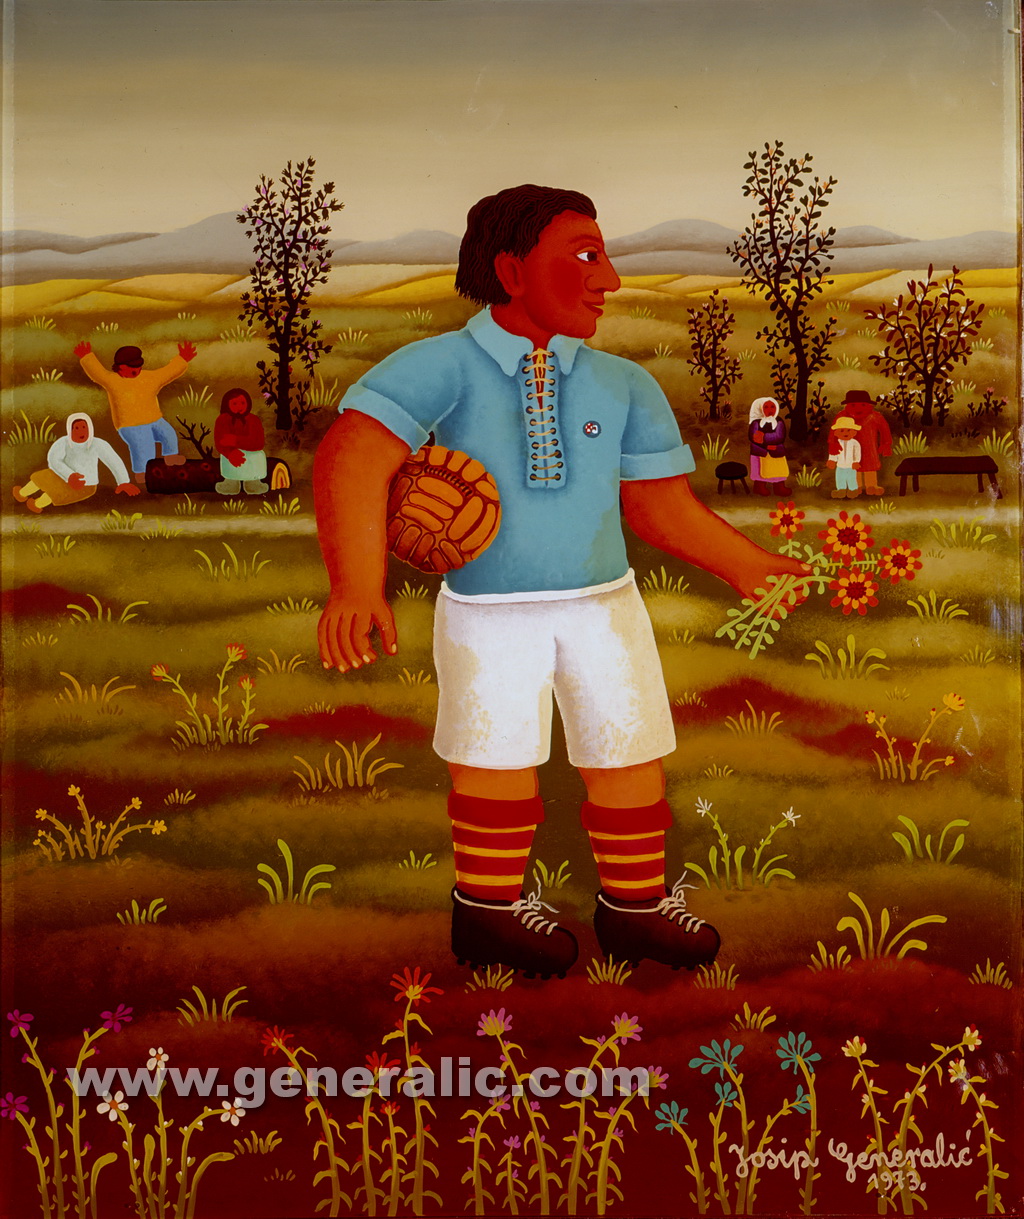 Josip Generalic, 1973, Soccer player with flowers, oil on glass